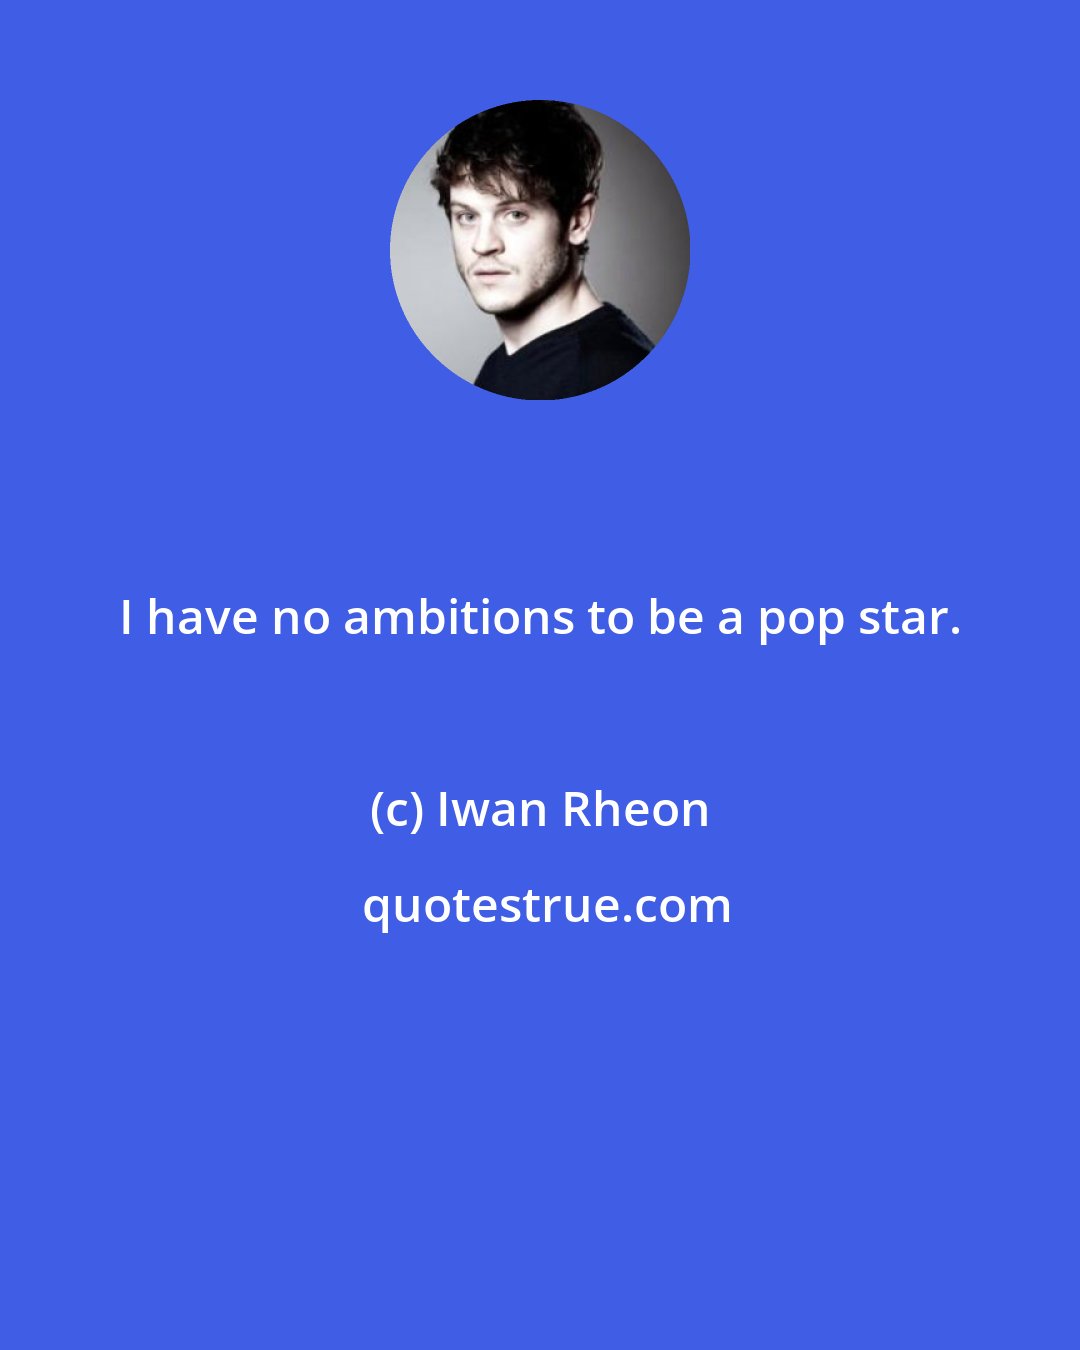 Iwan Rheon: I have no ambitions to be a pop star.